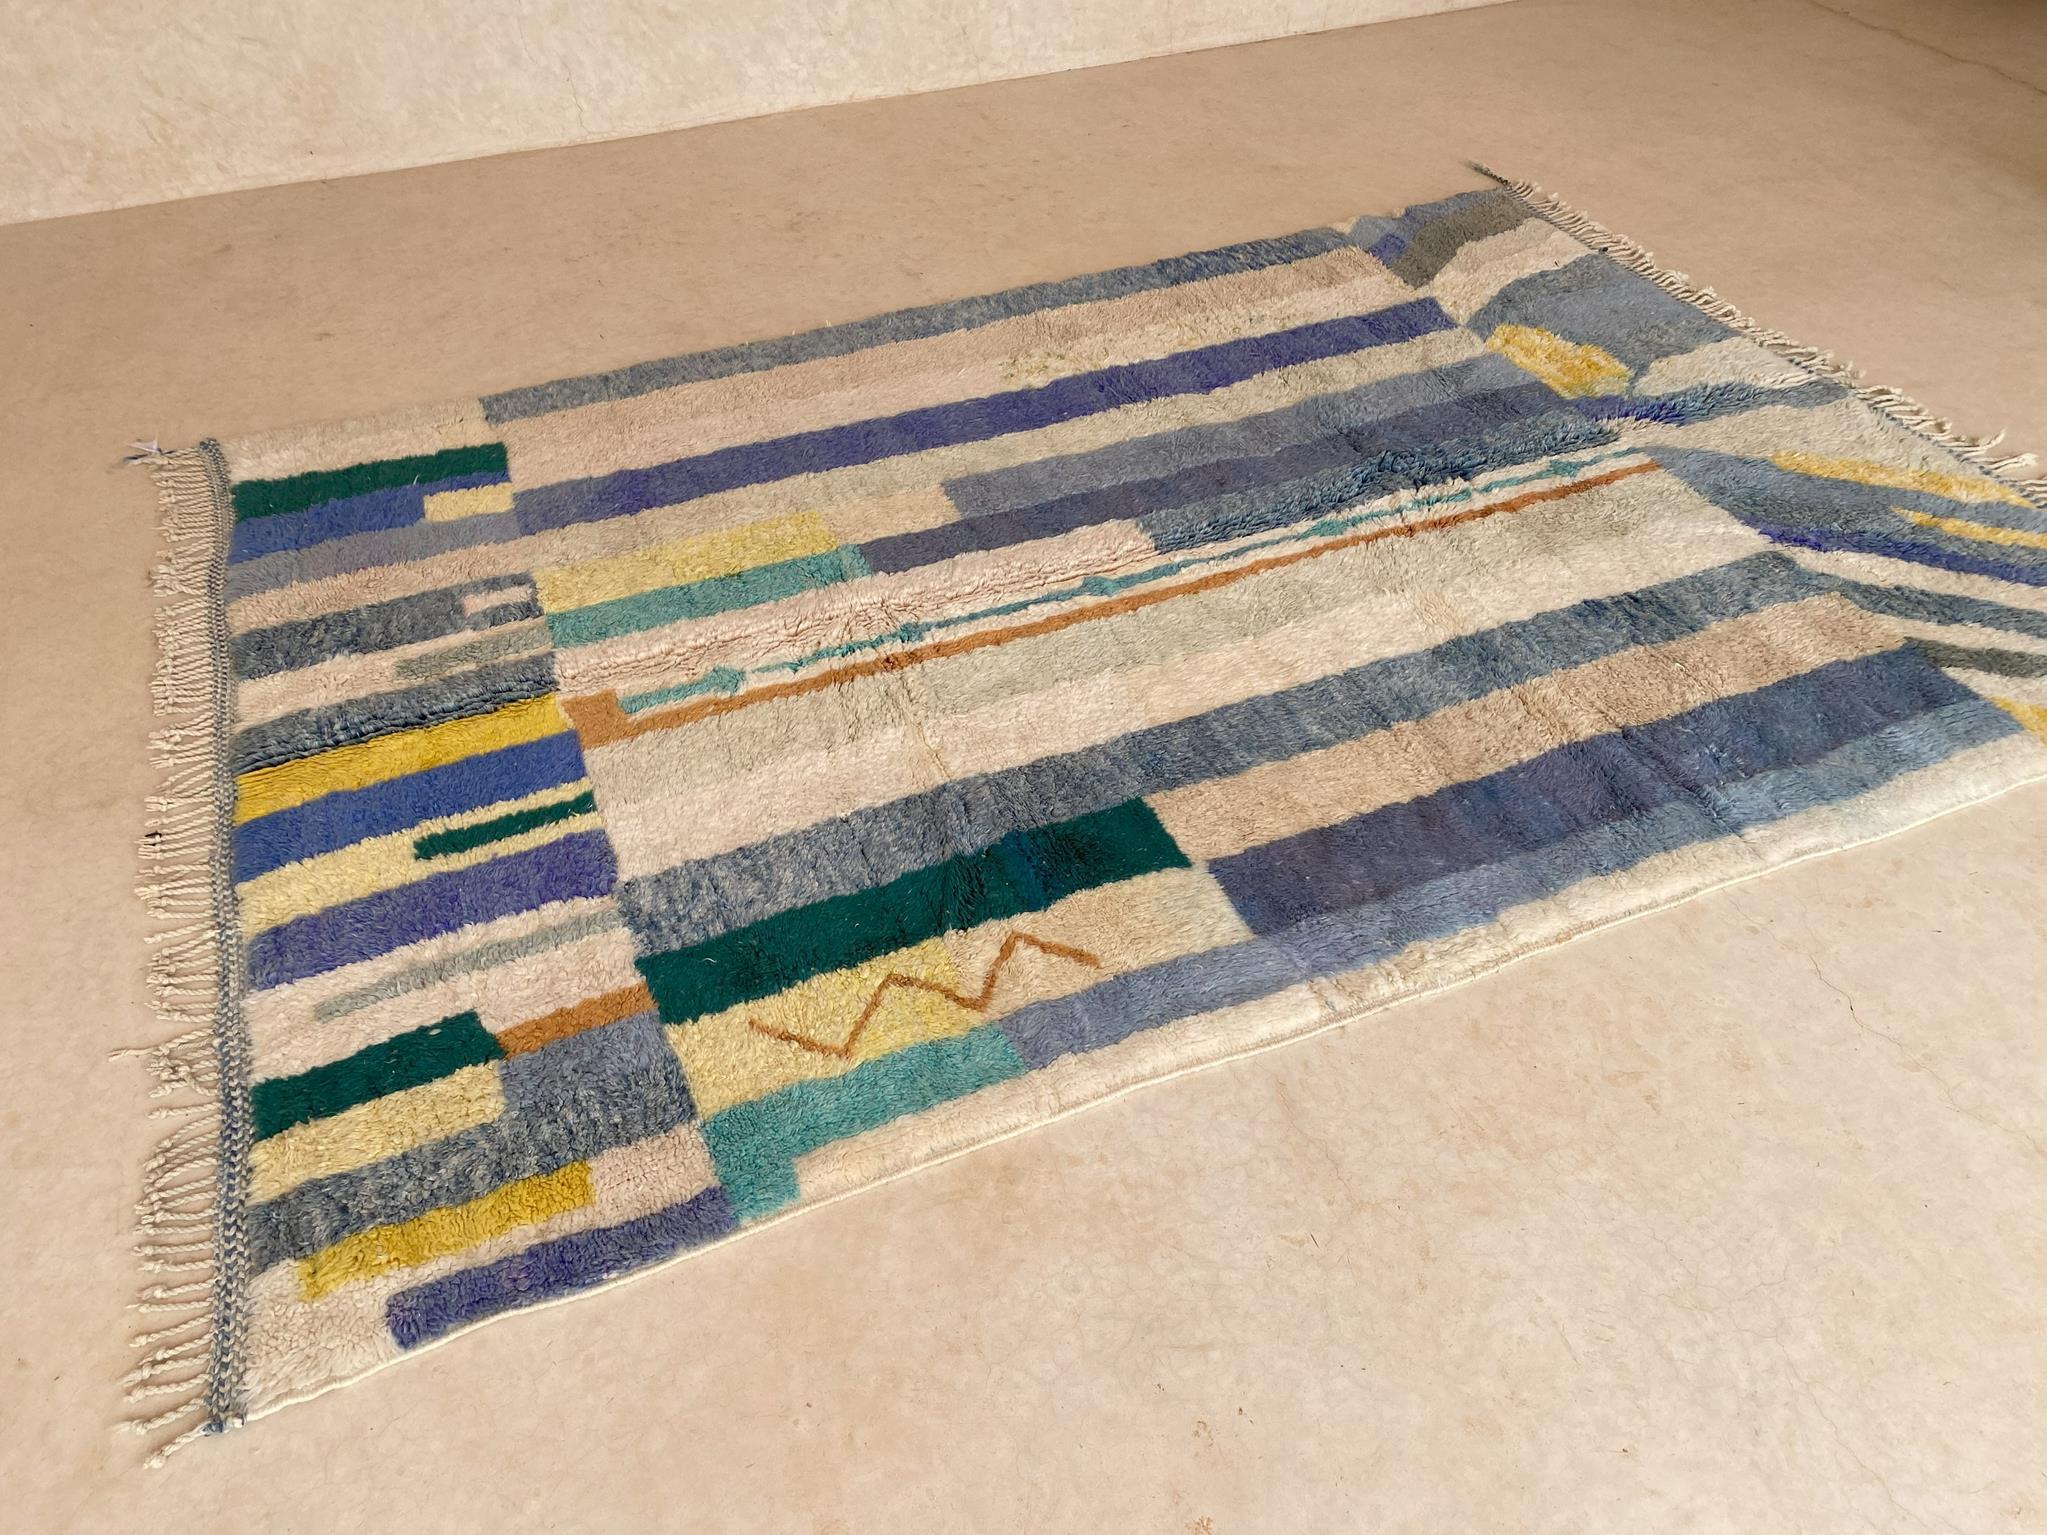 Modern Moroccan wool Mrirt rug - Blue/cream/yellow - 7x10.2feet / 214x310cm In Good Condition For Sale In Marrakech, MA